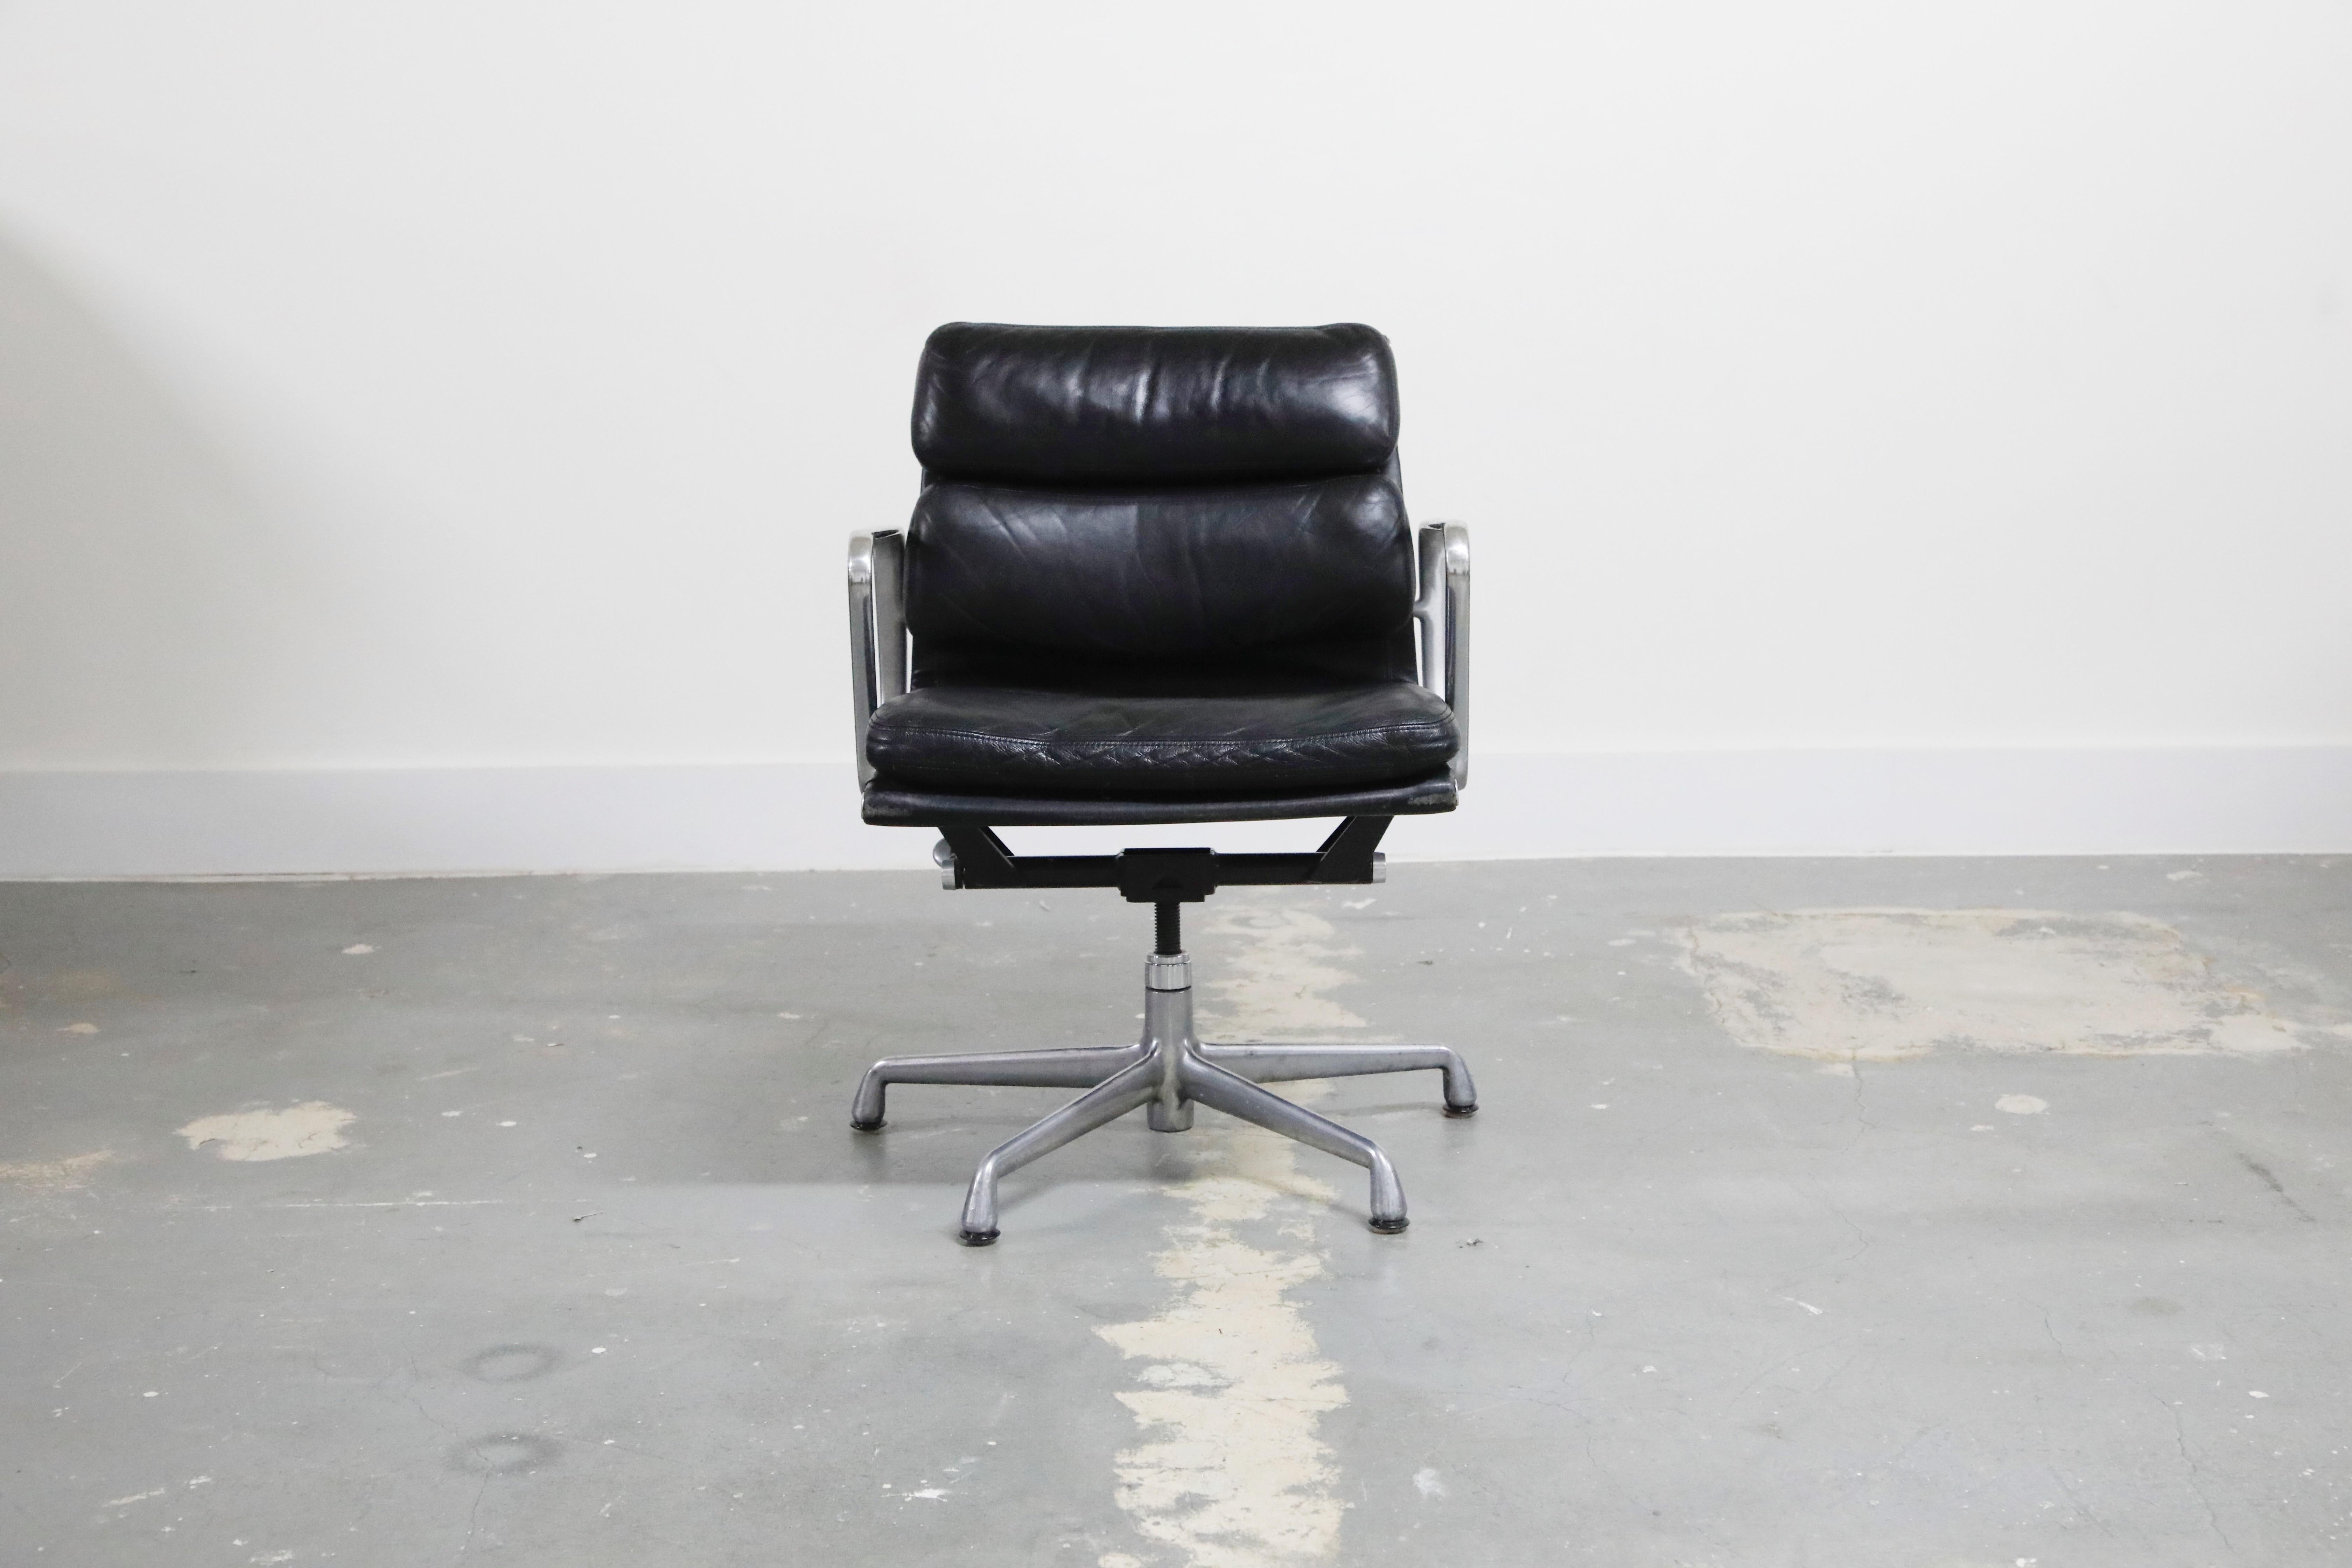 A collectible and sought after pair of leather 'Soft Pad' Management chairs from the Aluminum Group line, designed by Charles and Ray Eames for Herman Miller. Featuring its original black leather over five-star aluminum base. Signed underneath with